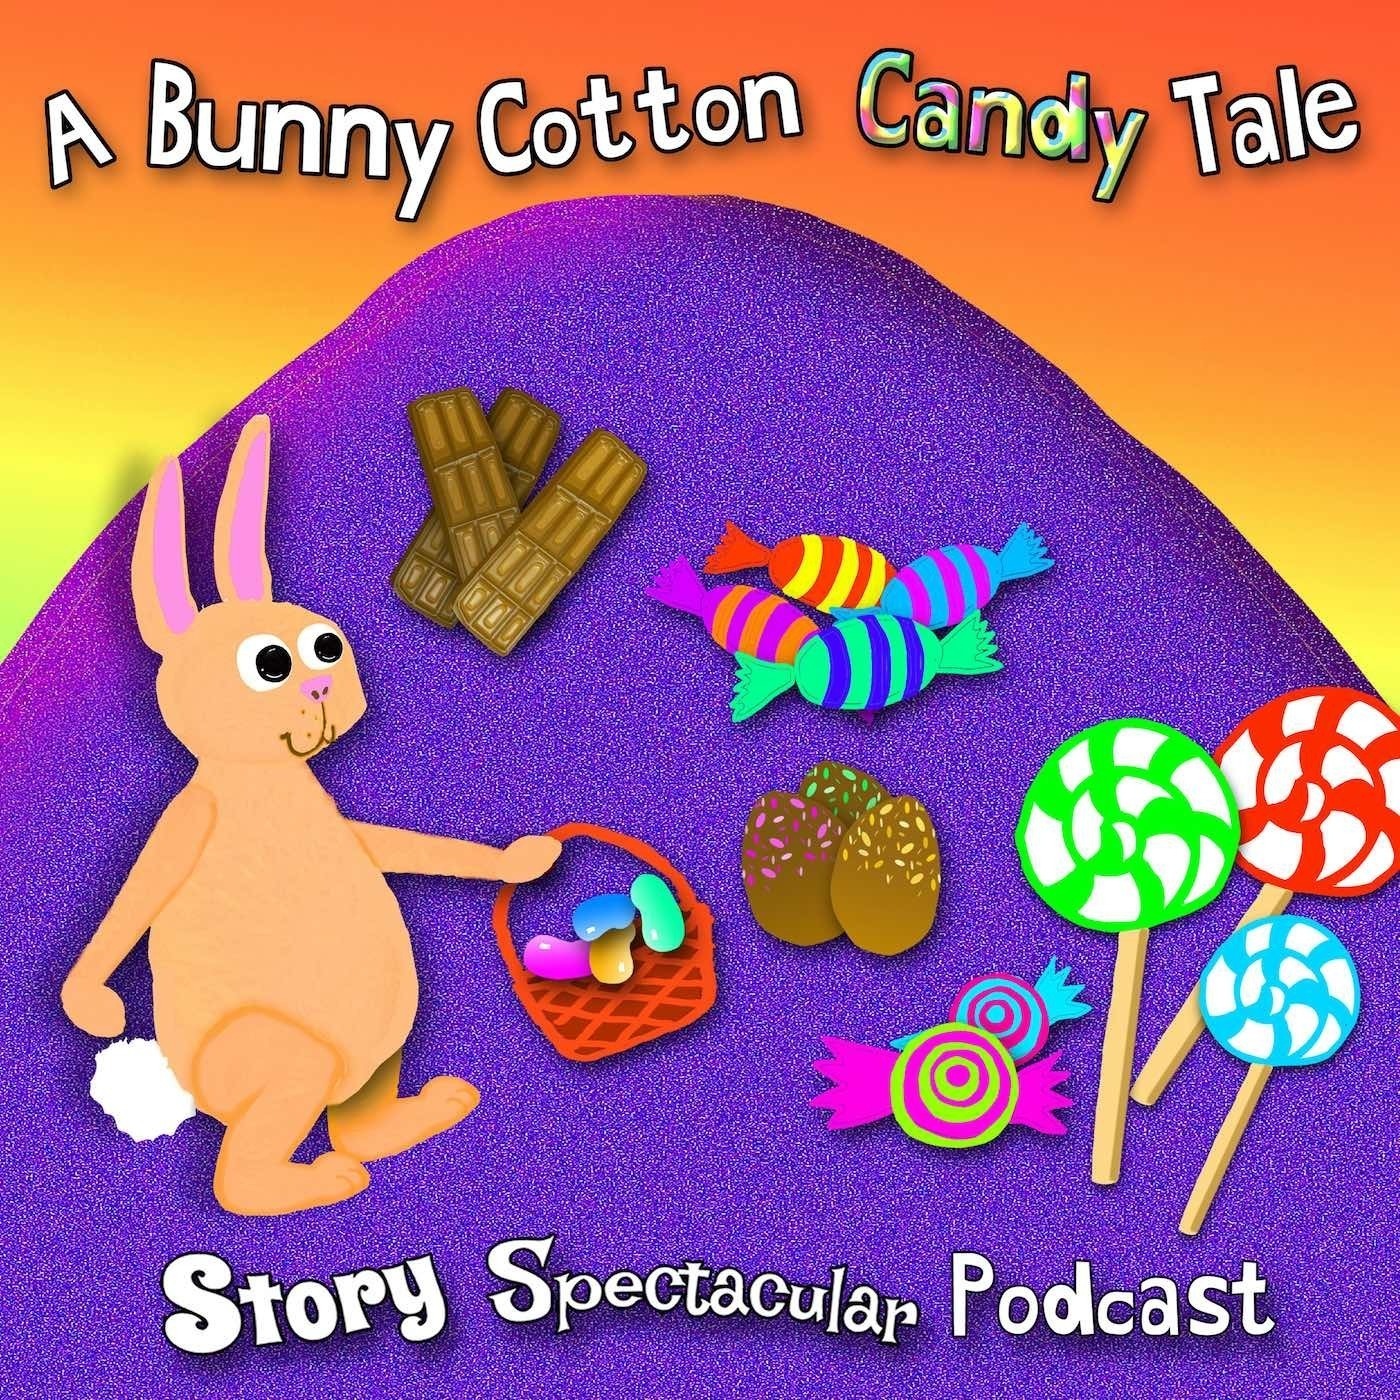 A Bunny Cotton Candy Tale